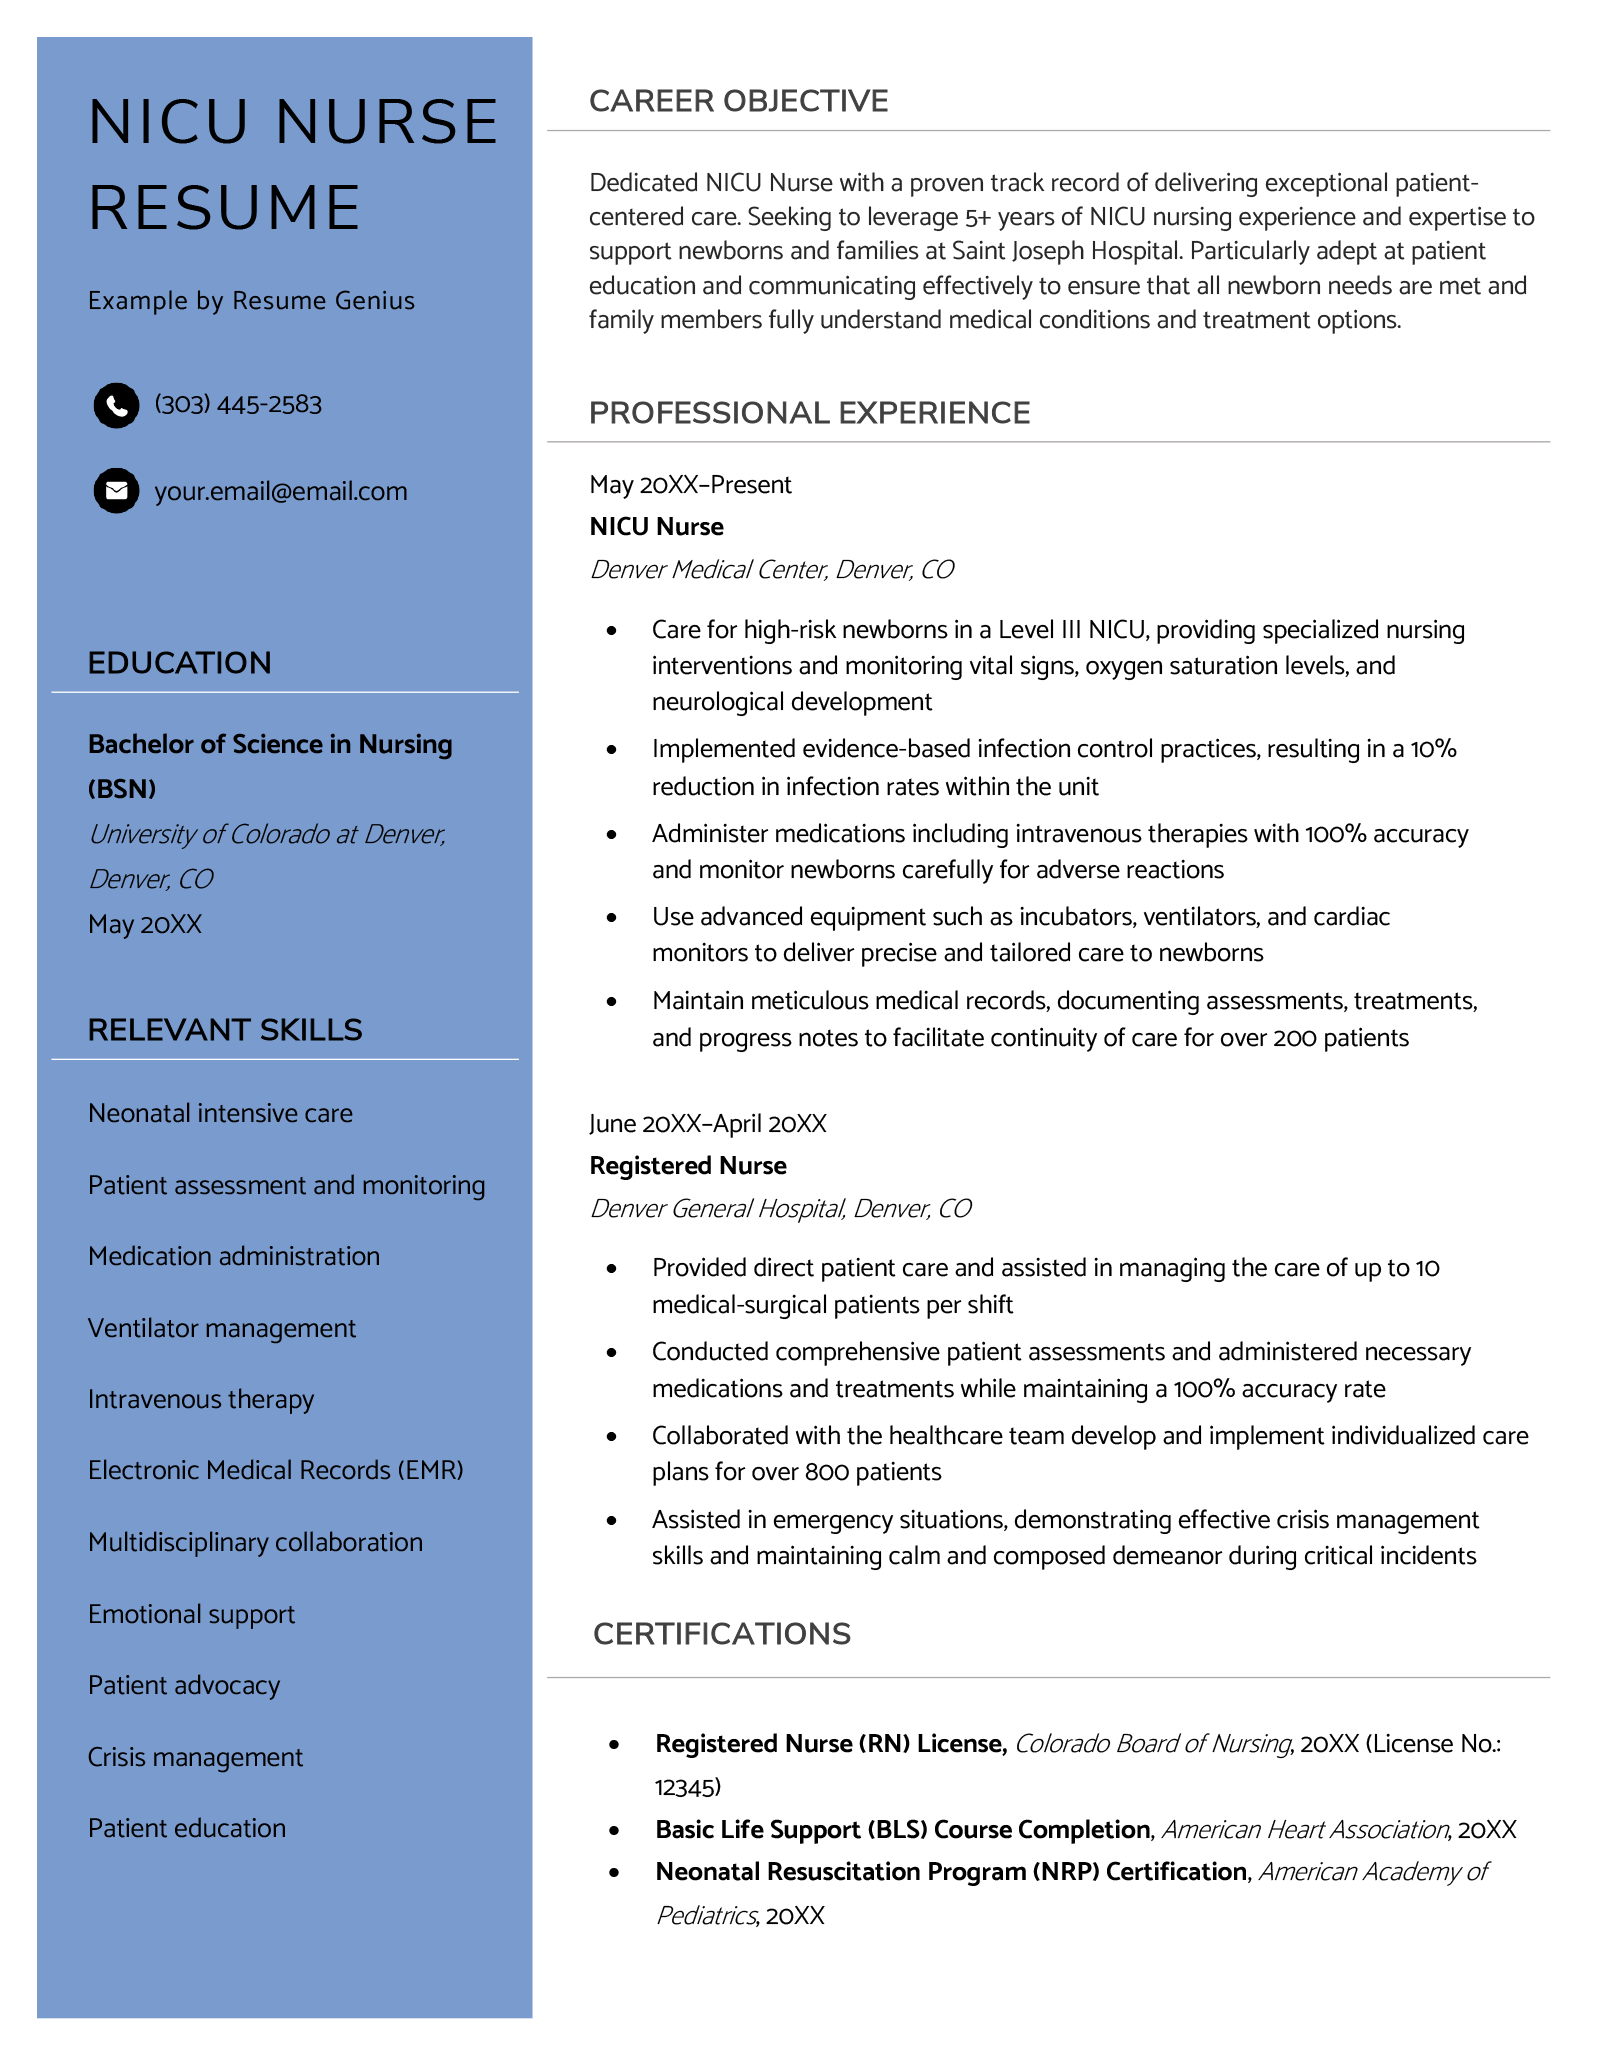 NICU nurse resume example that features a blue sidebar containing the candidate's name, contact information, education, and skills. The resume summary, work experience, and certifications are featured on the right.